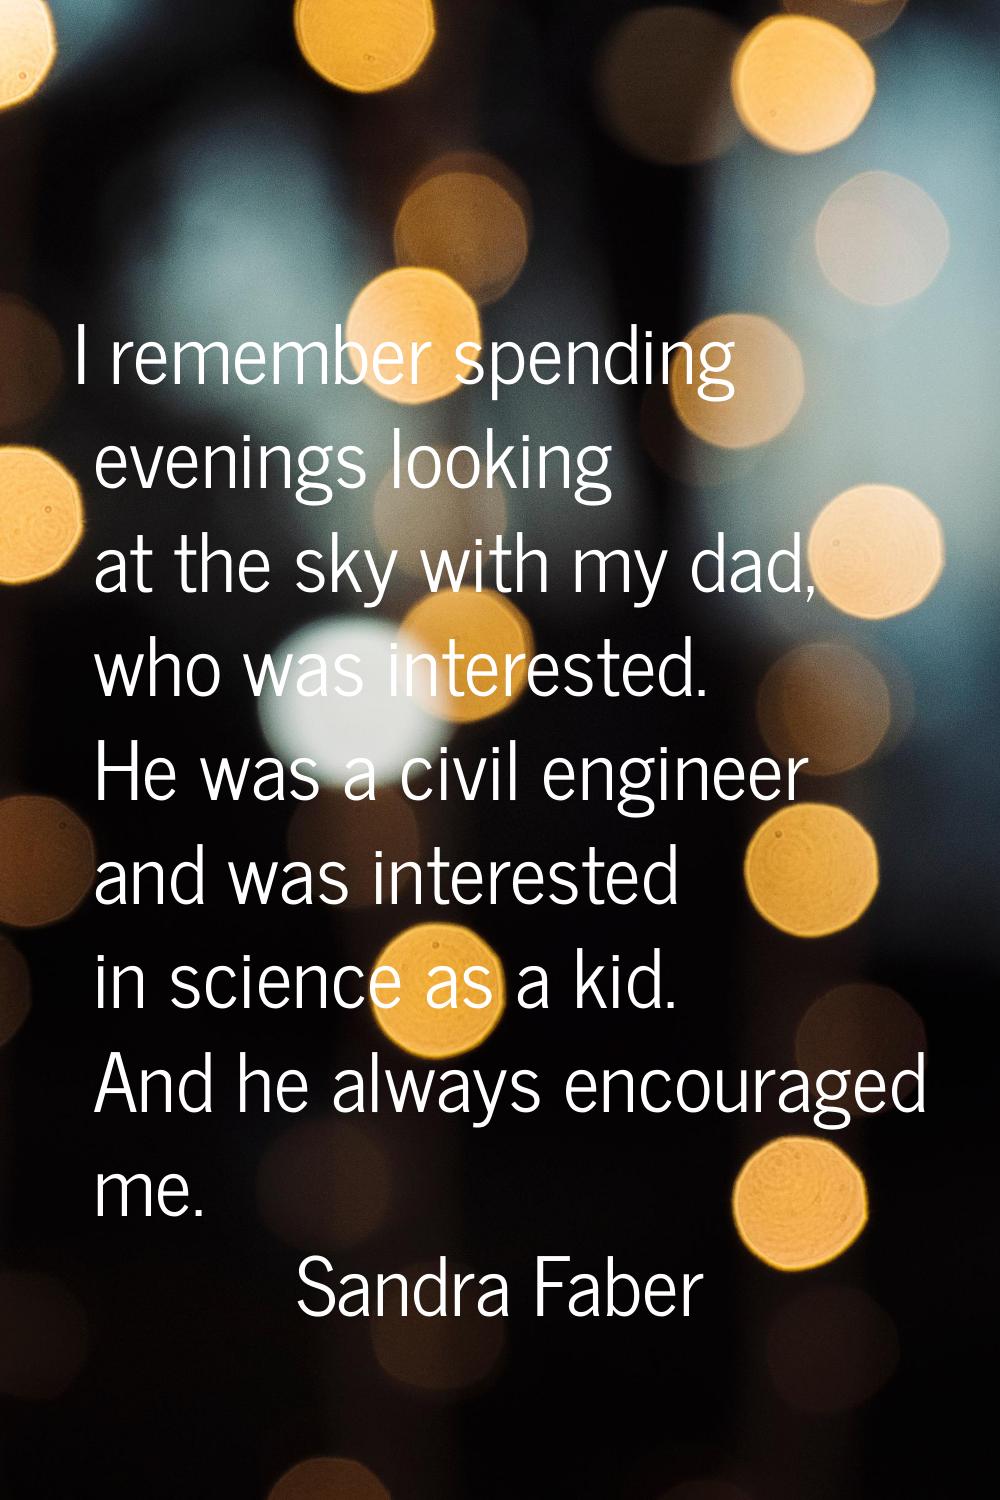 I remember spending evenings looking at the sky with my dad, who was interested. He was a civil eng